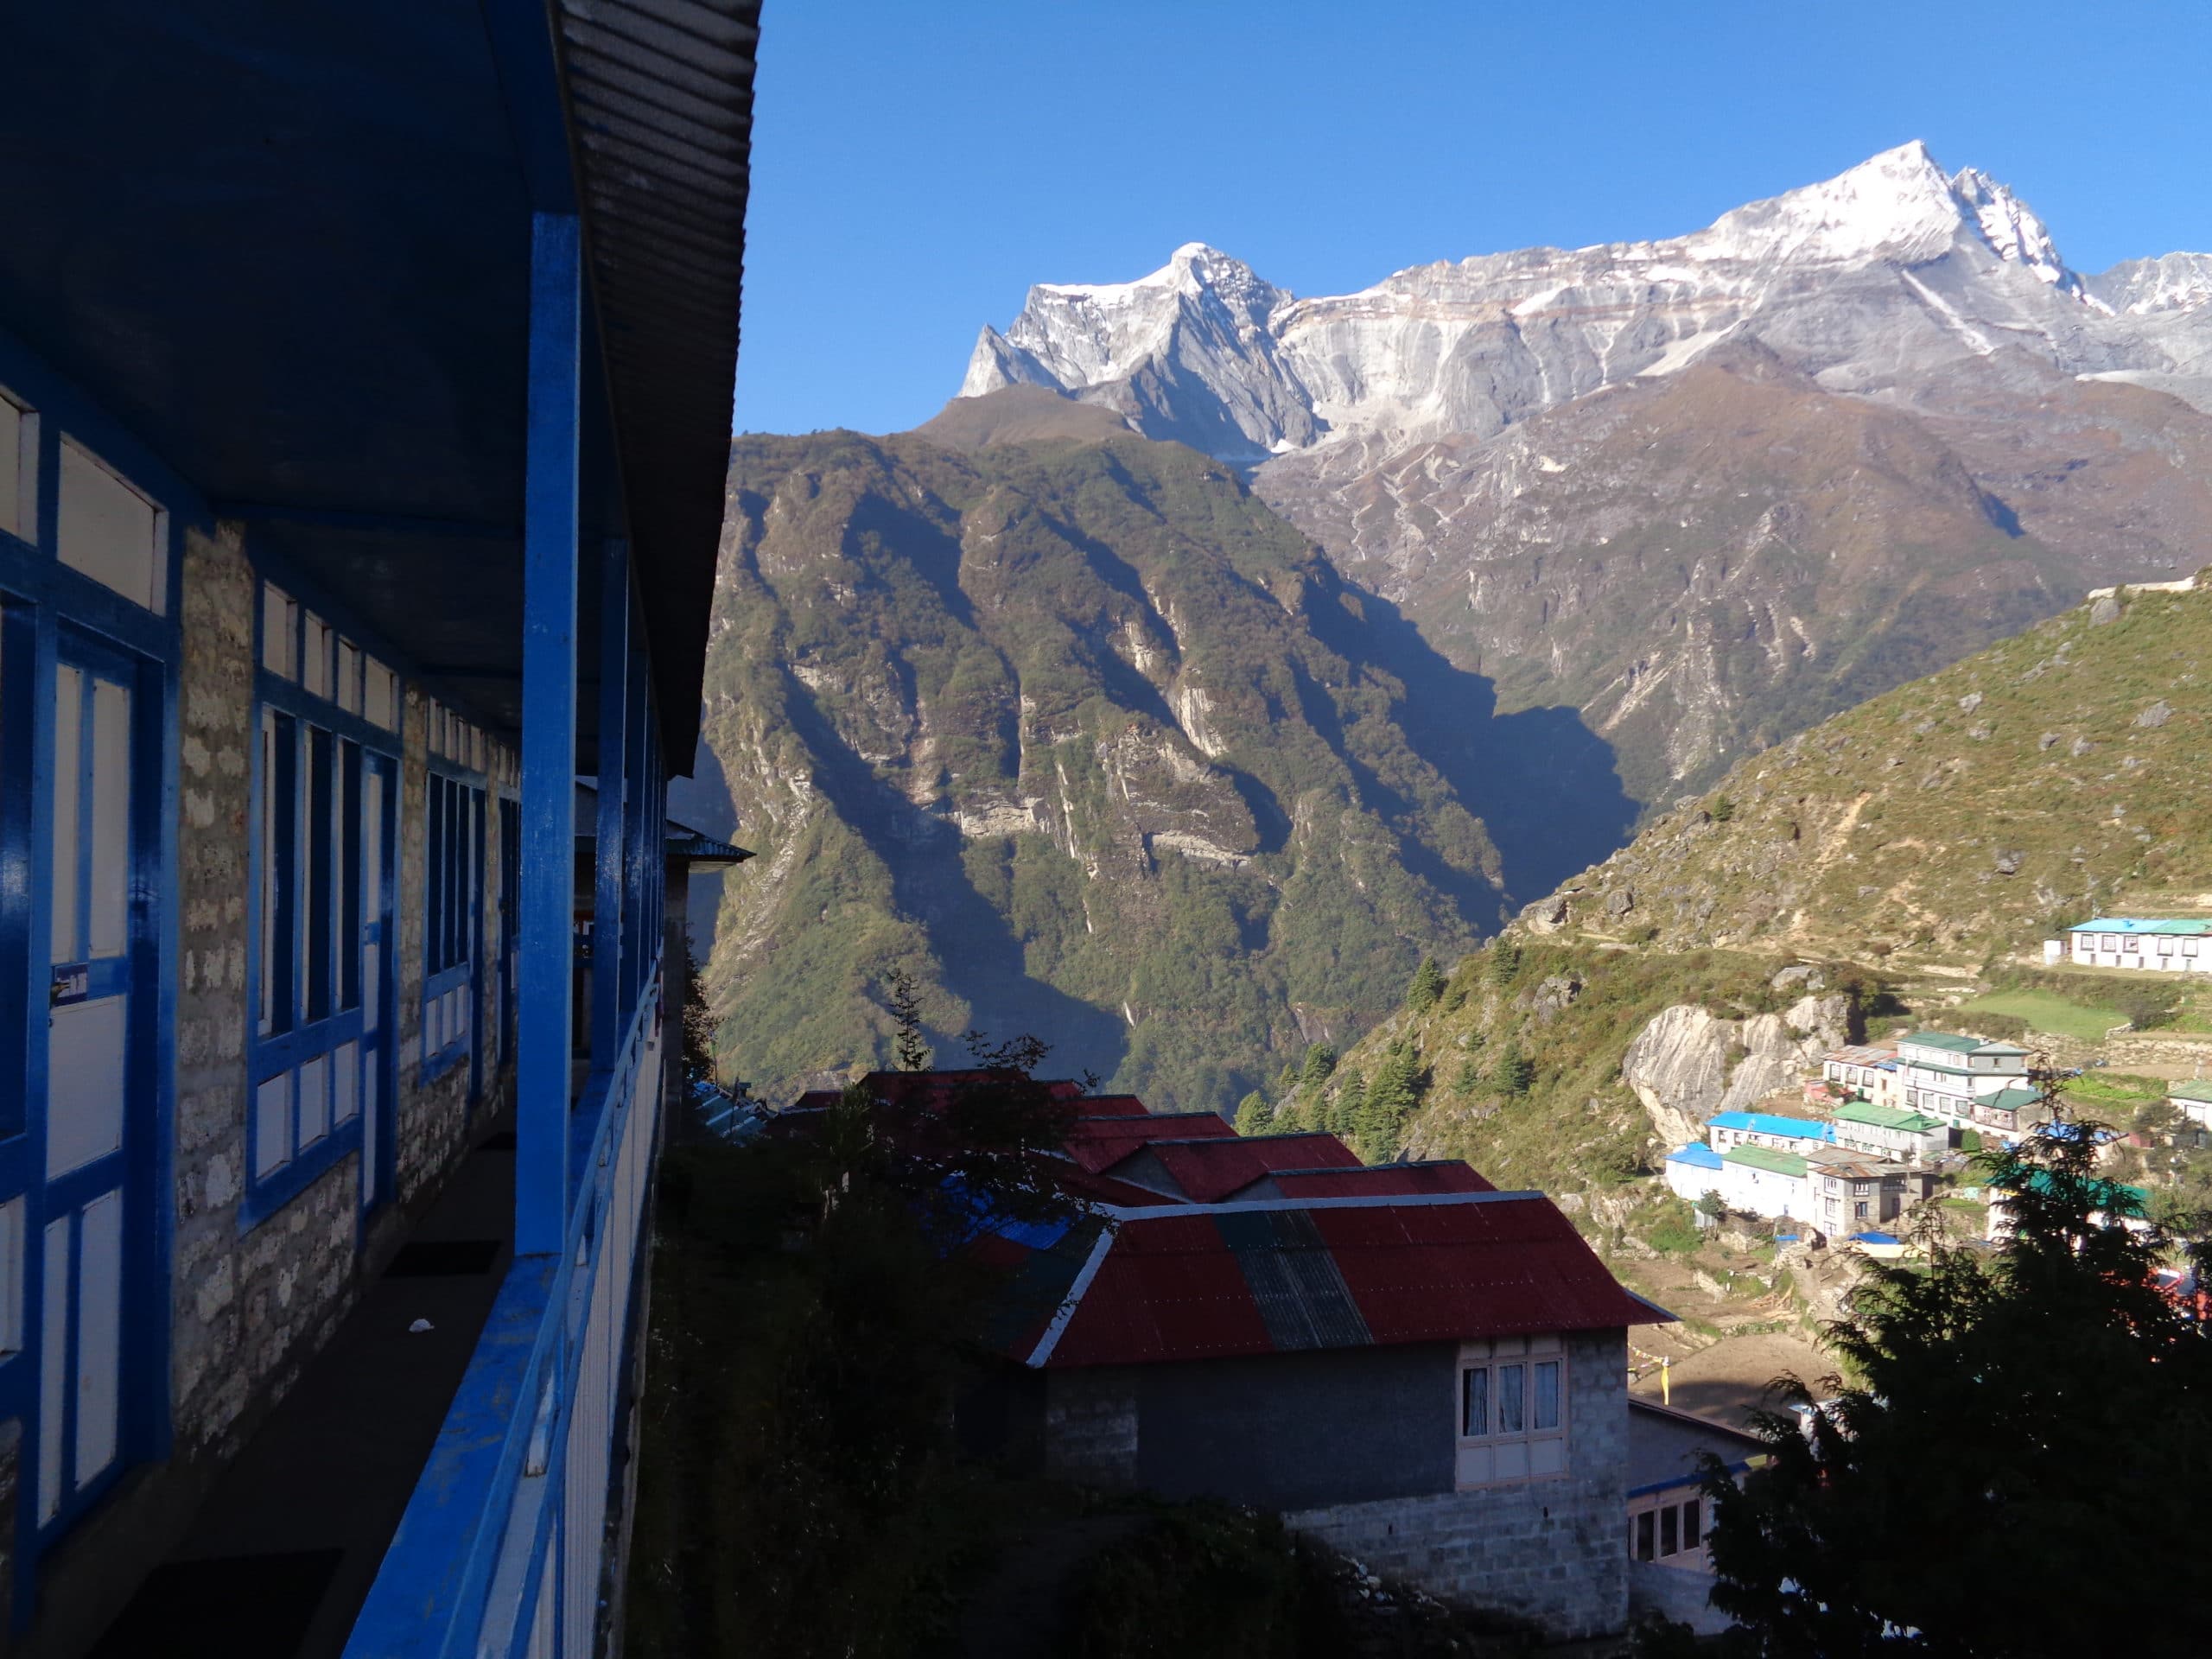 Namche Bazarr on the trail to Everest Base Camp